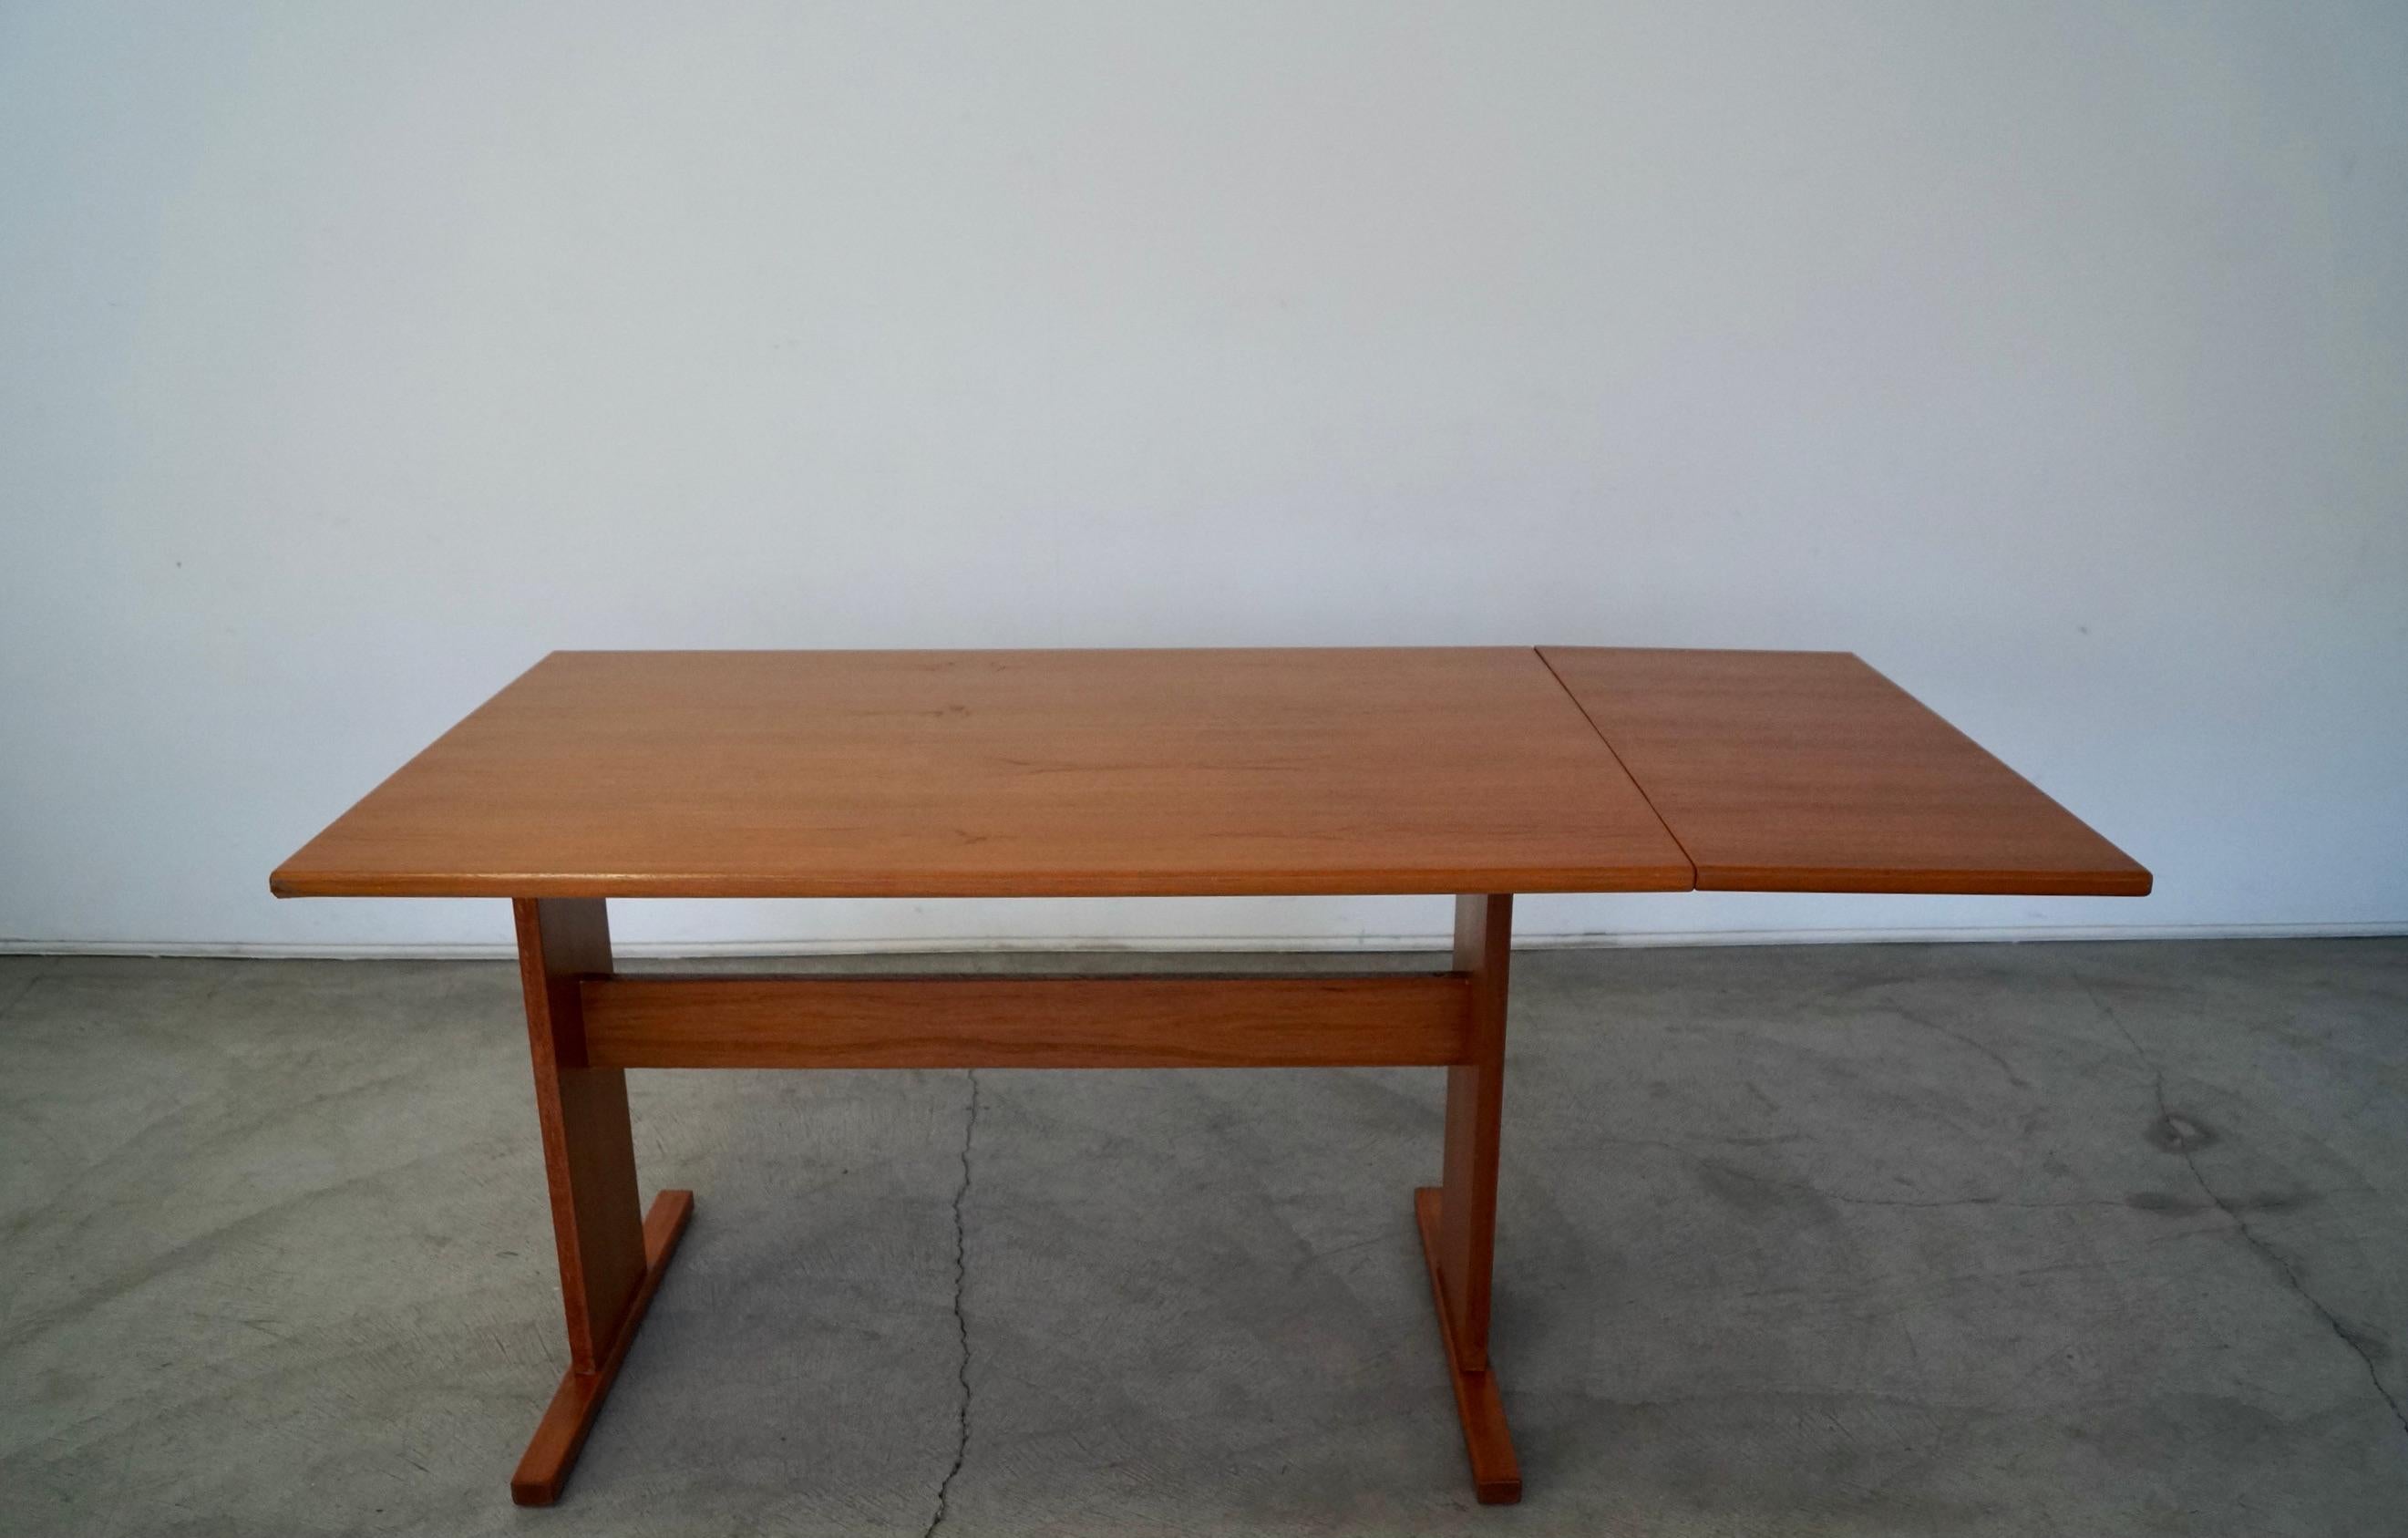 Vintage Mid-Century Modern dining table for sale. Manufactured in the 1970's by Gangso, and made in Denmark. Original Danish Modern piece, and made of teak. It has been professionally refinished and looks incredible. It has a nice clean design with